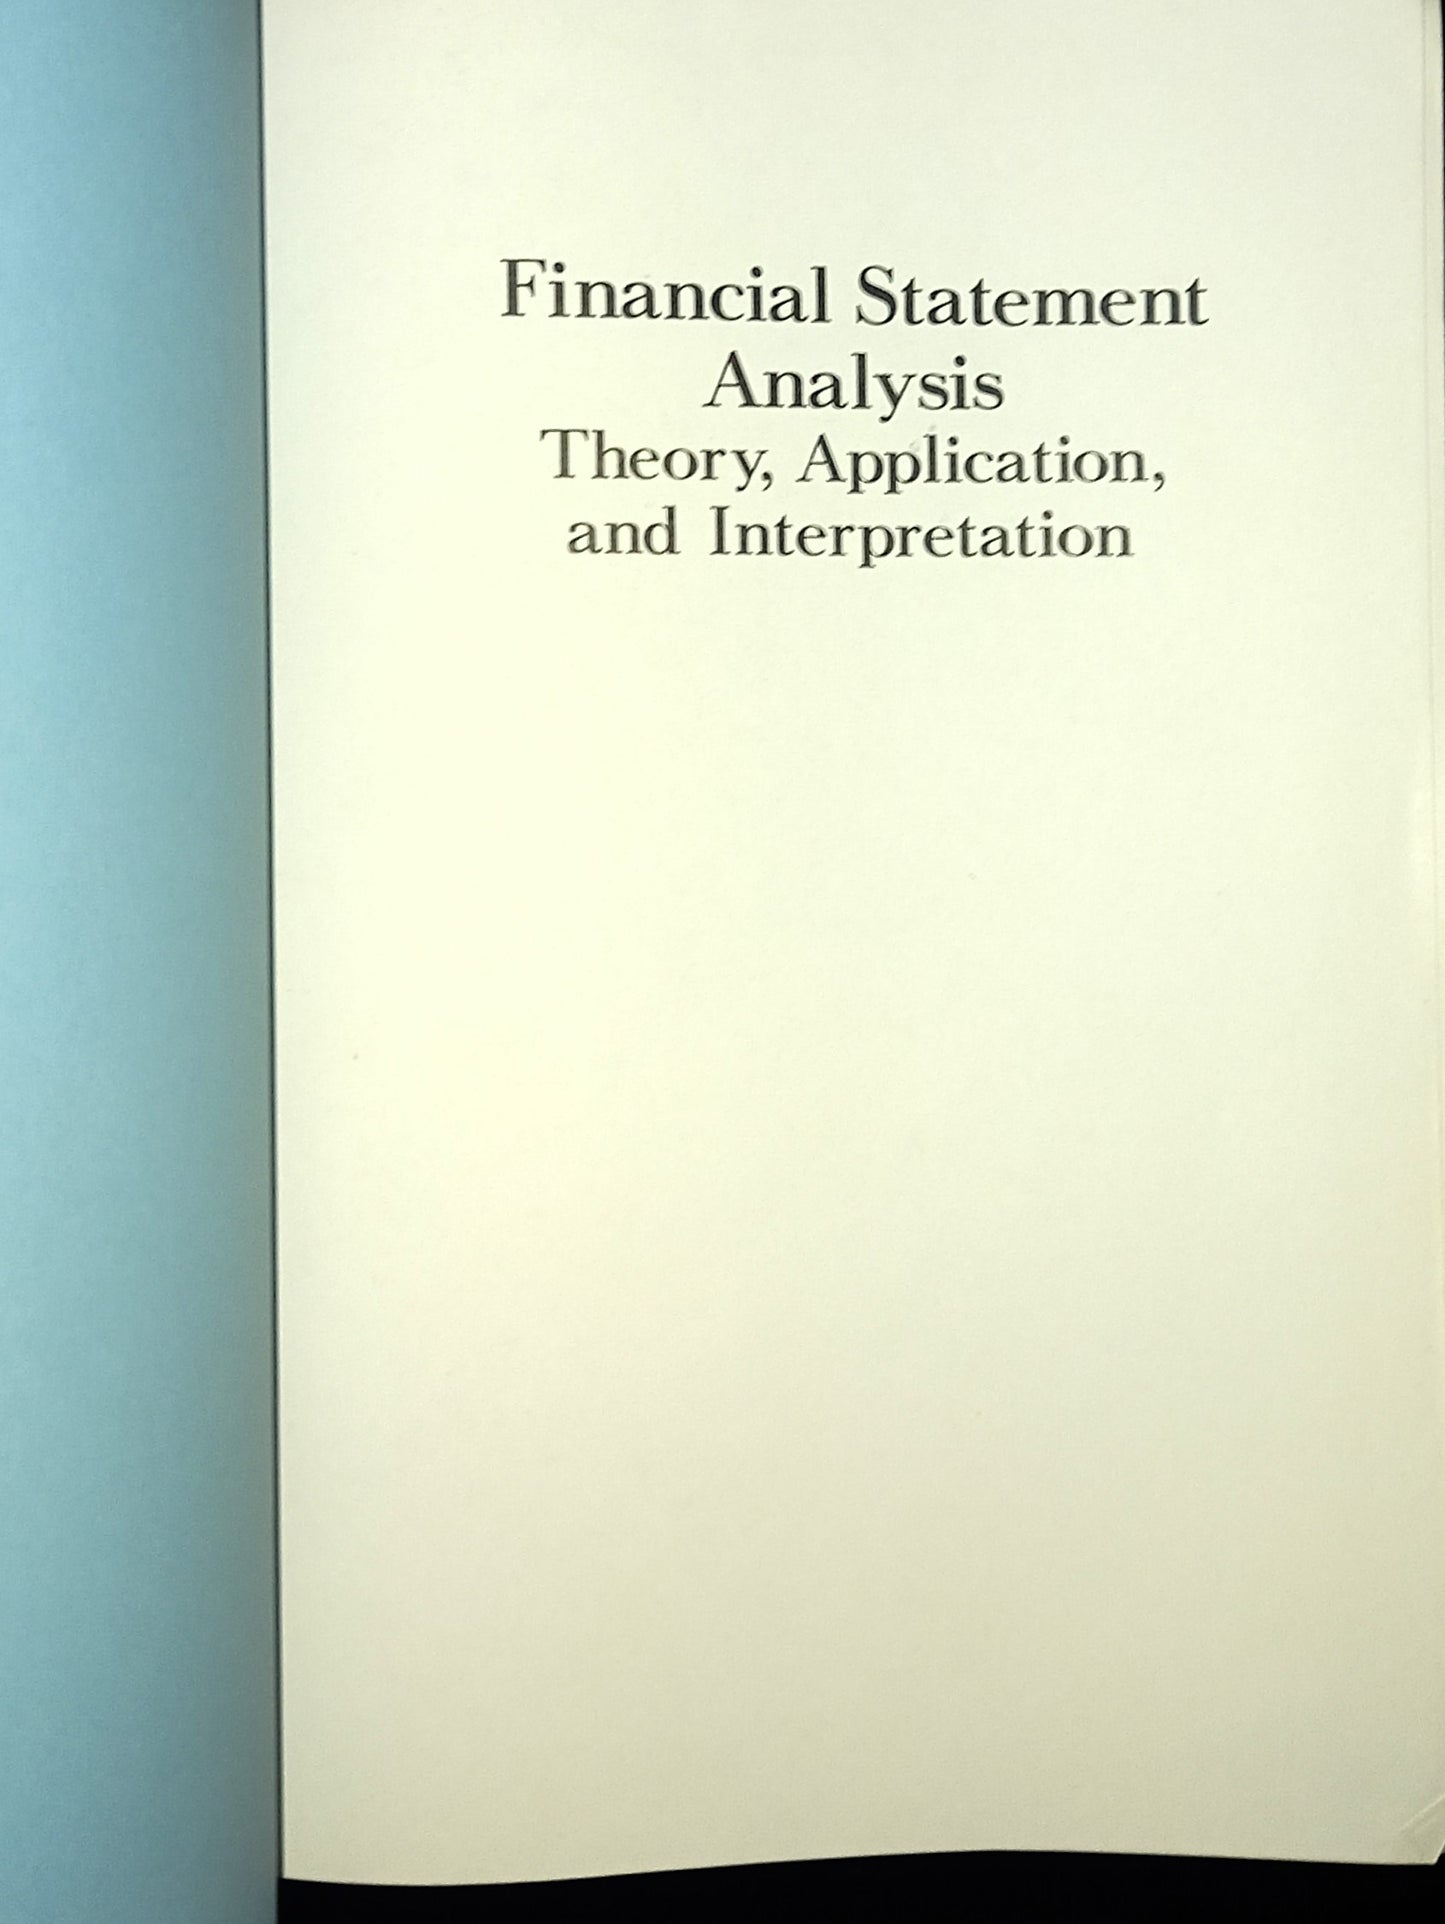 Financial Statement Analysis: Theory, Application, and Interpretation, 4th Edition